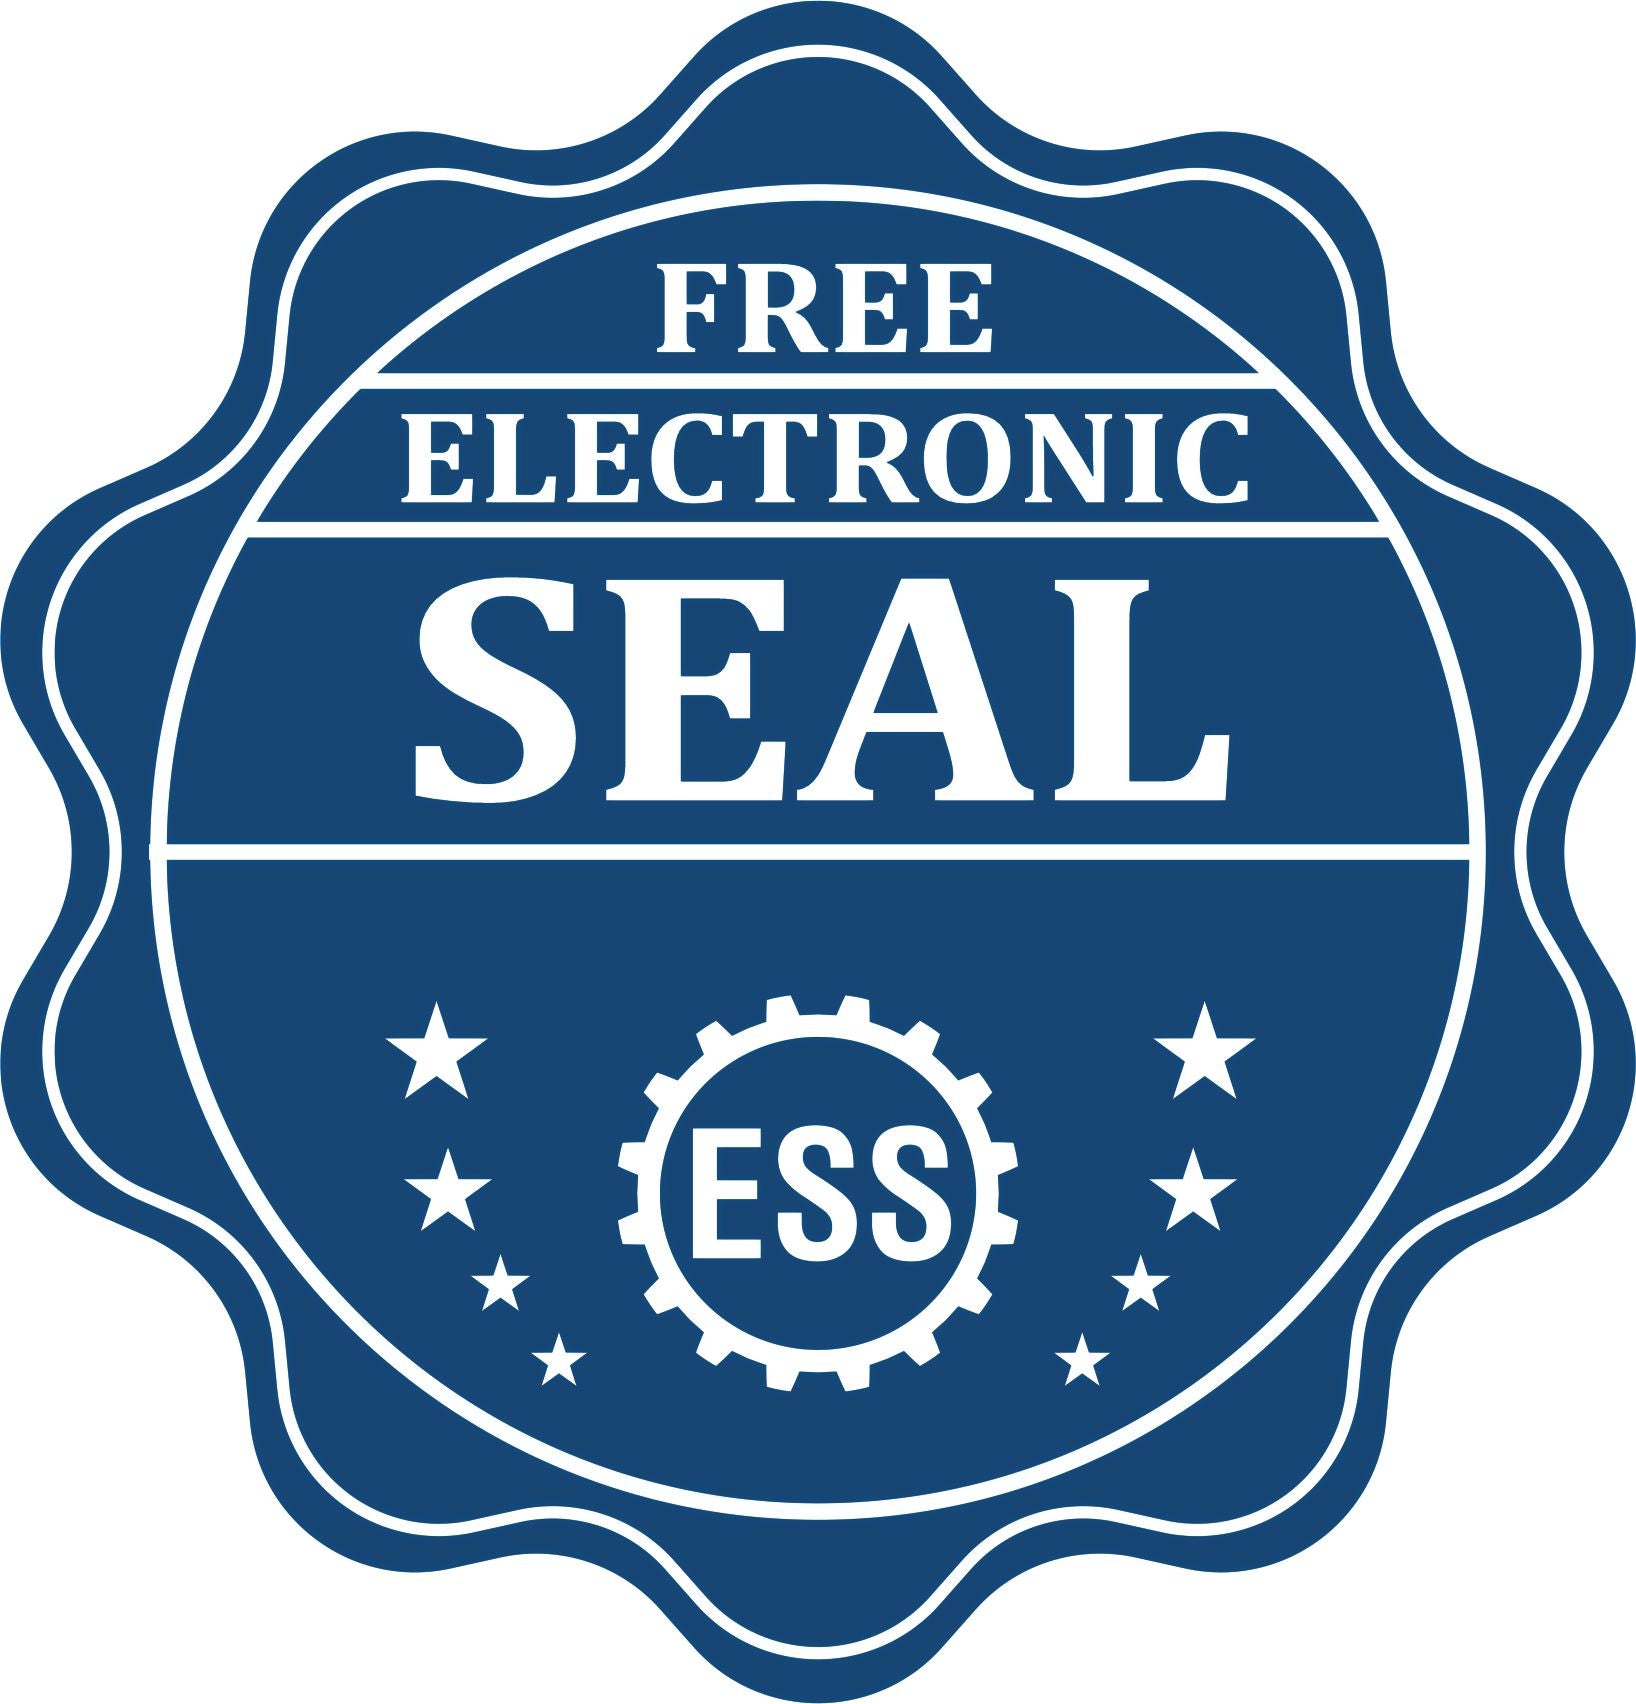 A badge showing a free electronic seal for the Super Slim Arizona Notary Public Stamp with stars and the ESS gear on the emblem.